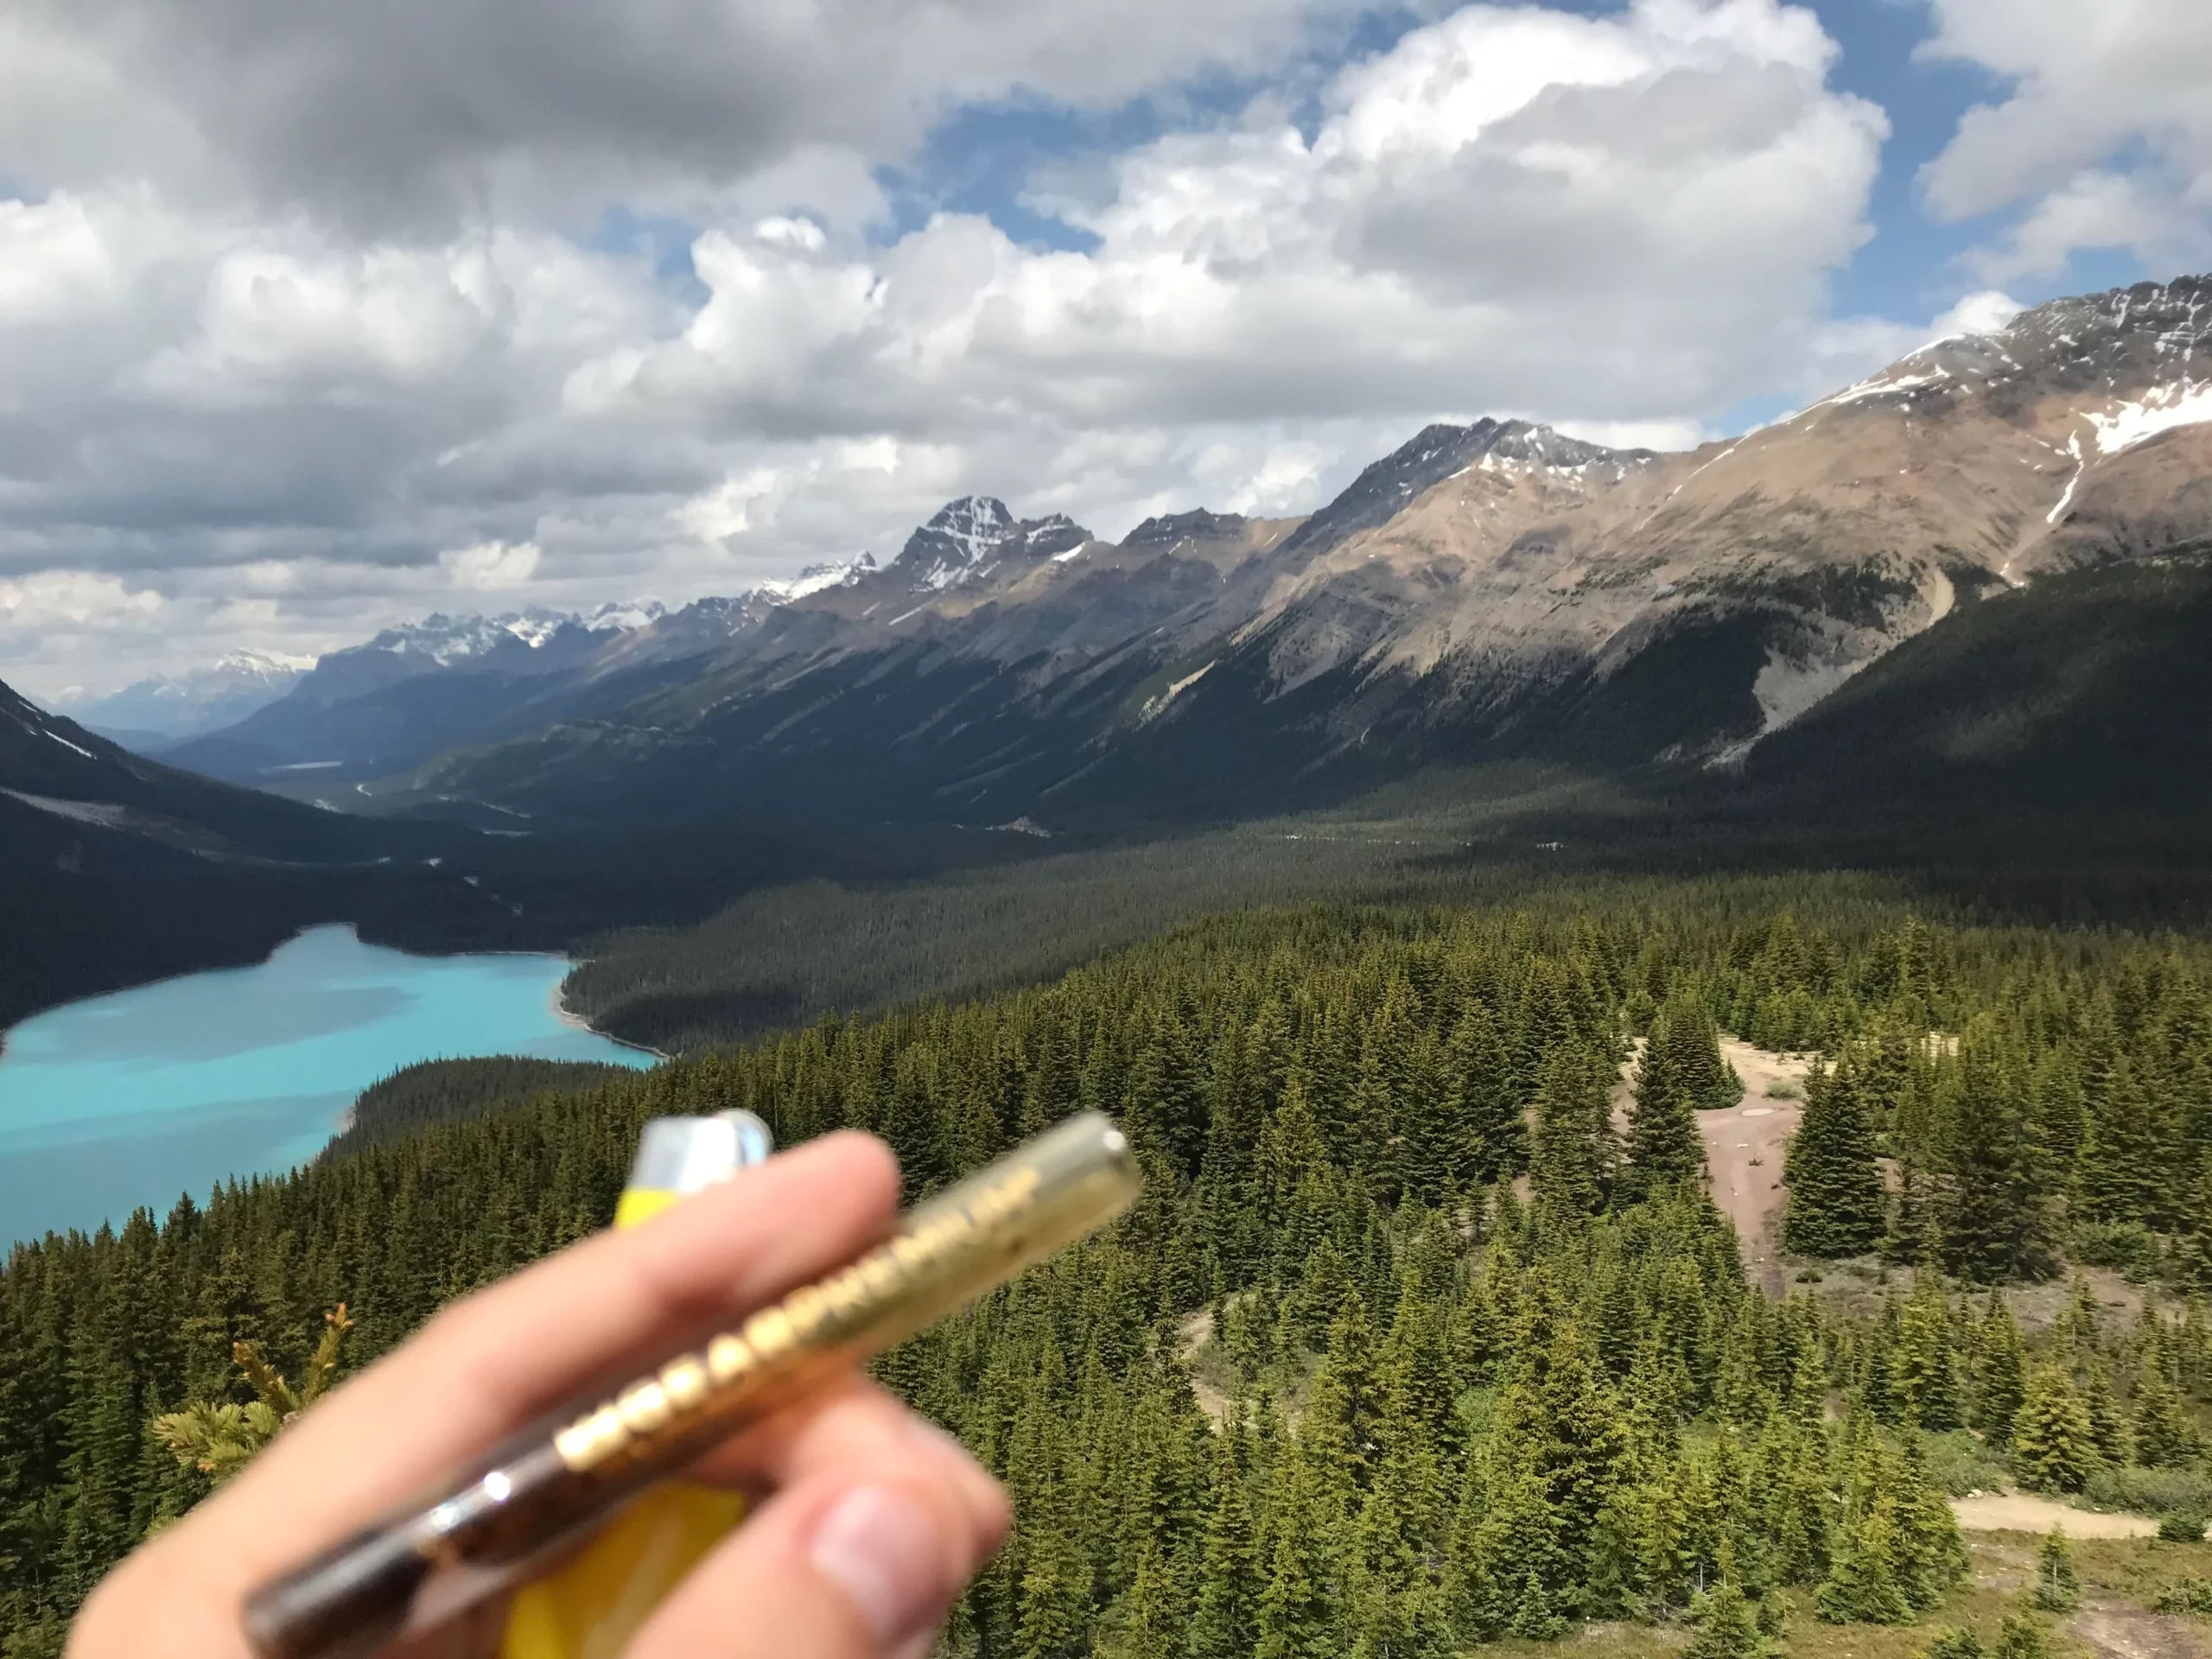 Will We Be Smoking in National Parks Soon?